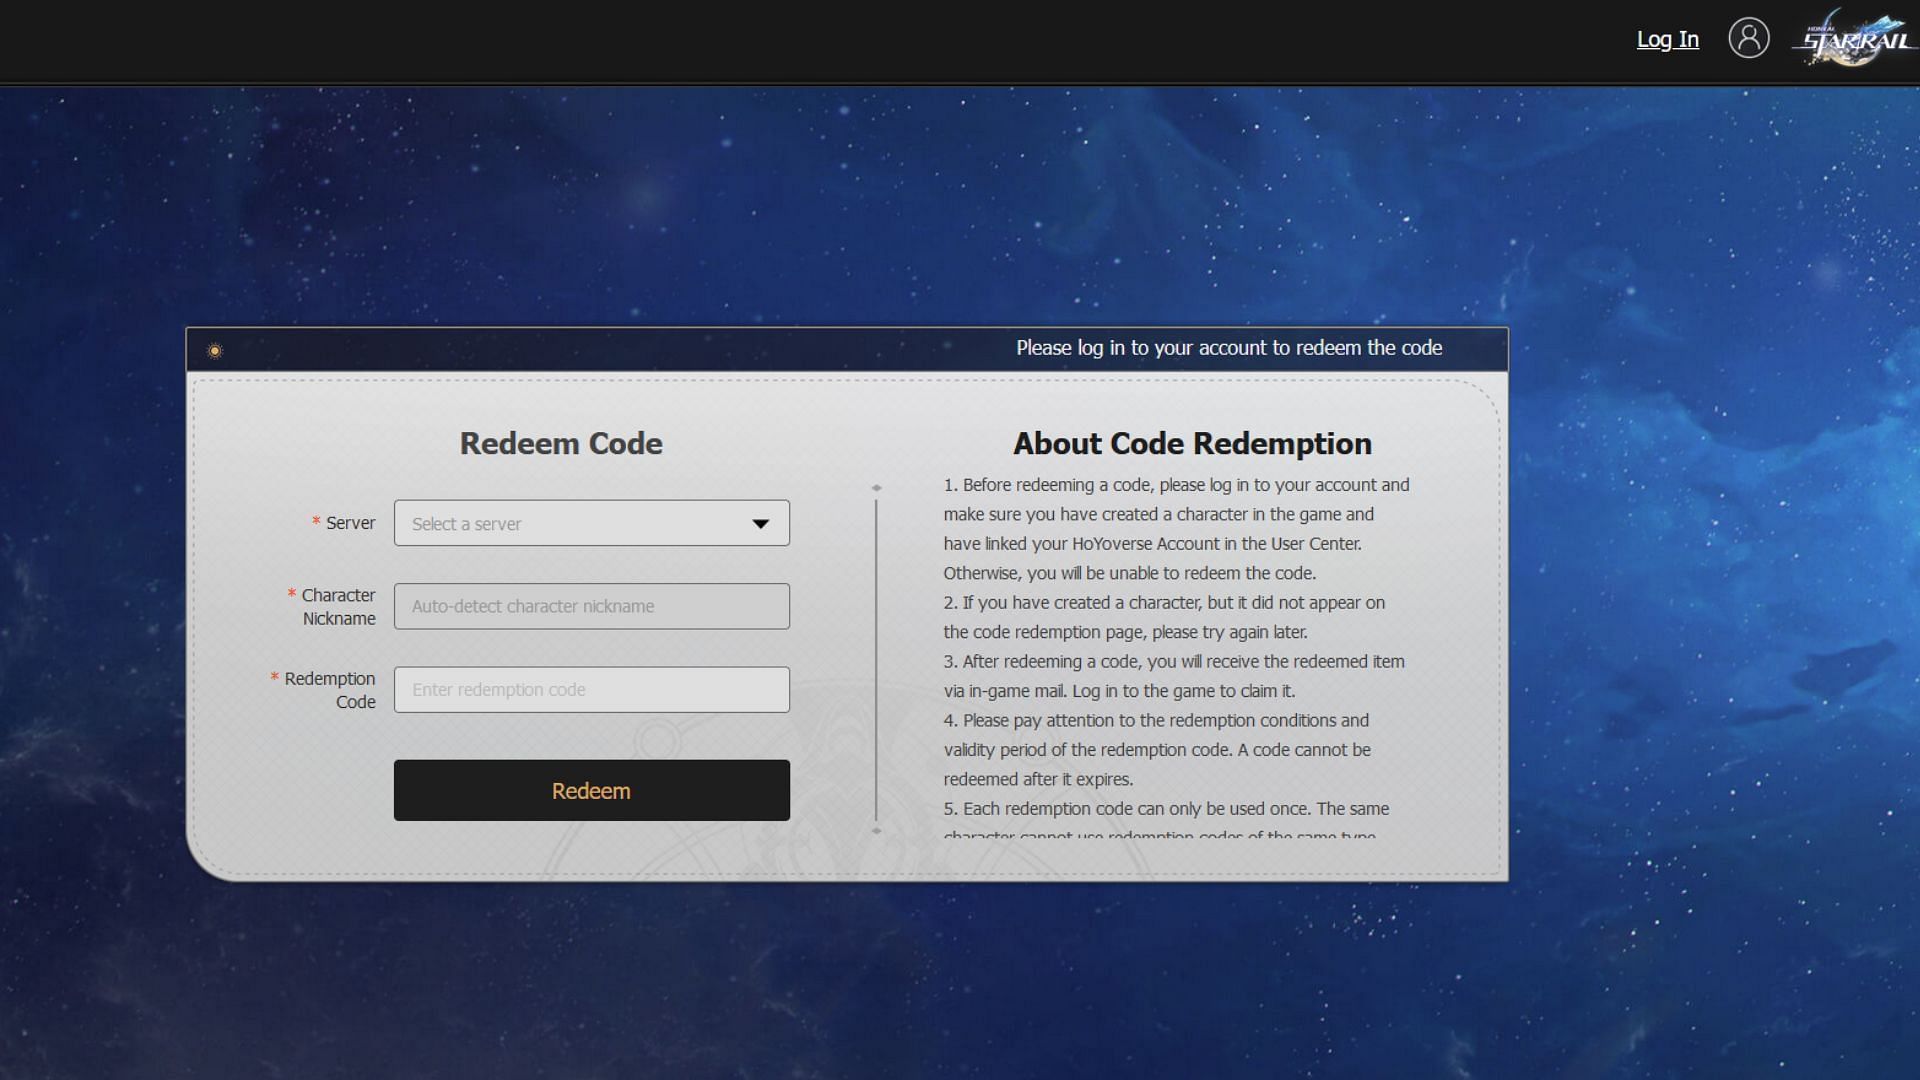 The official code redemption website. (Image via HoYoverse)